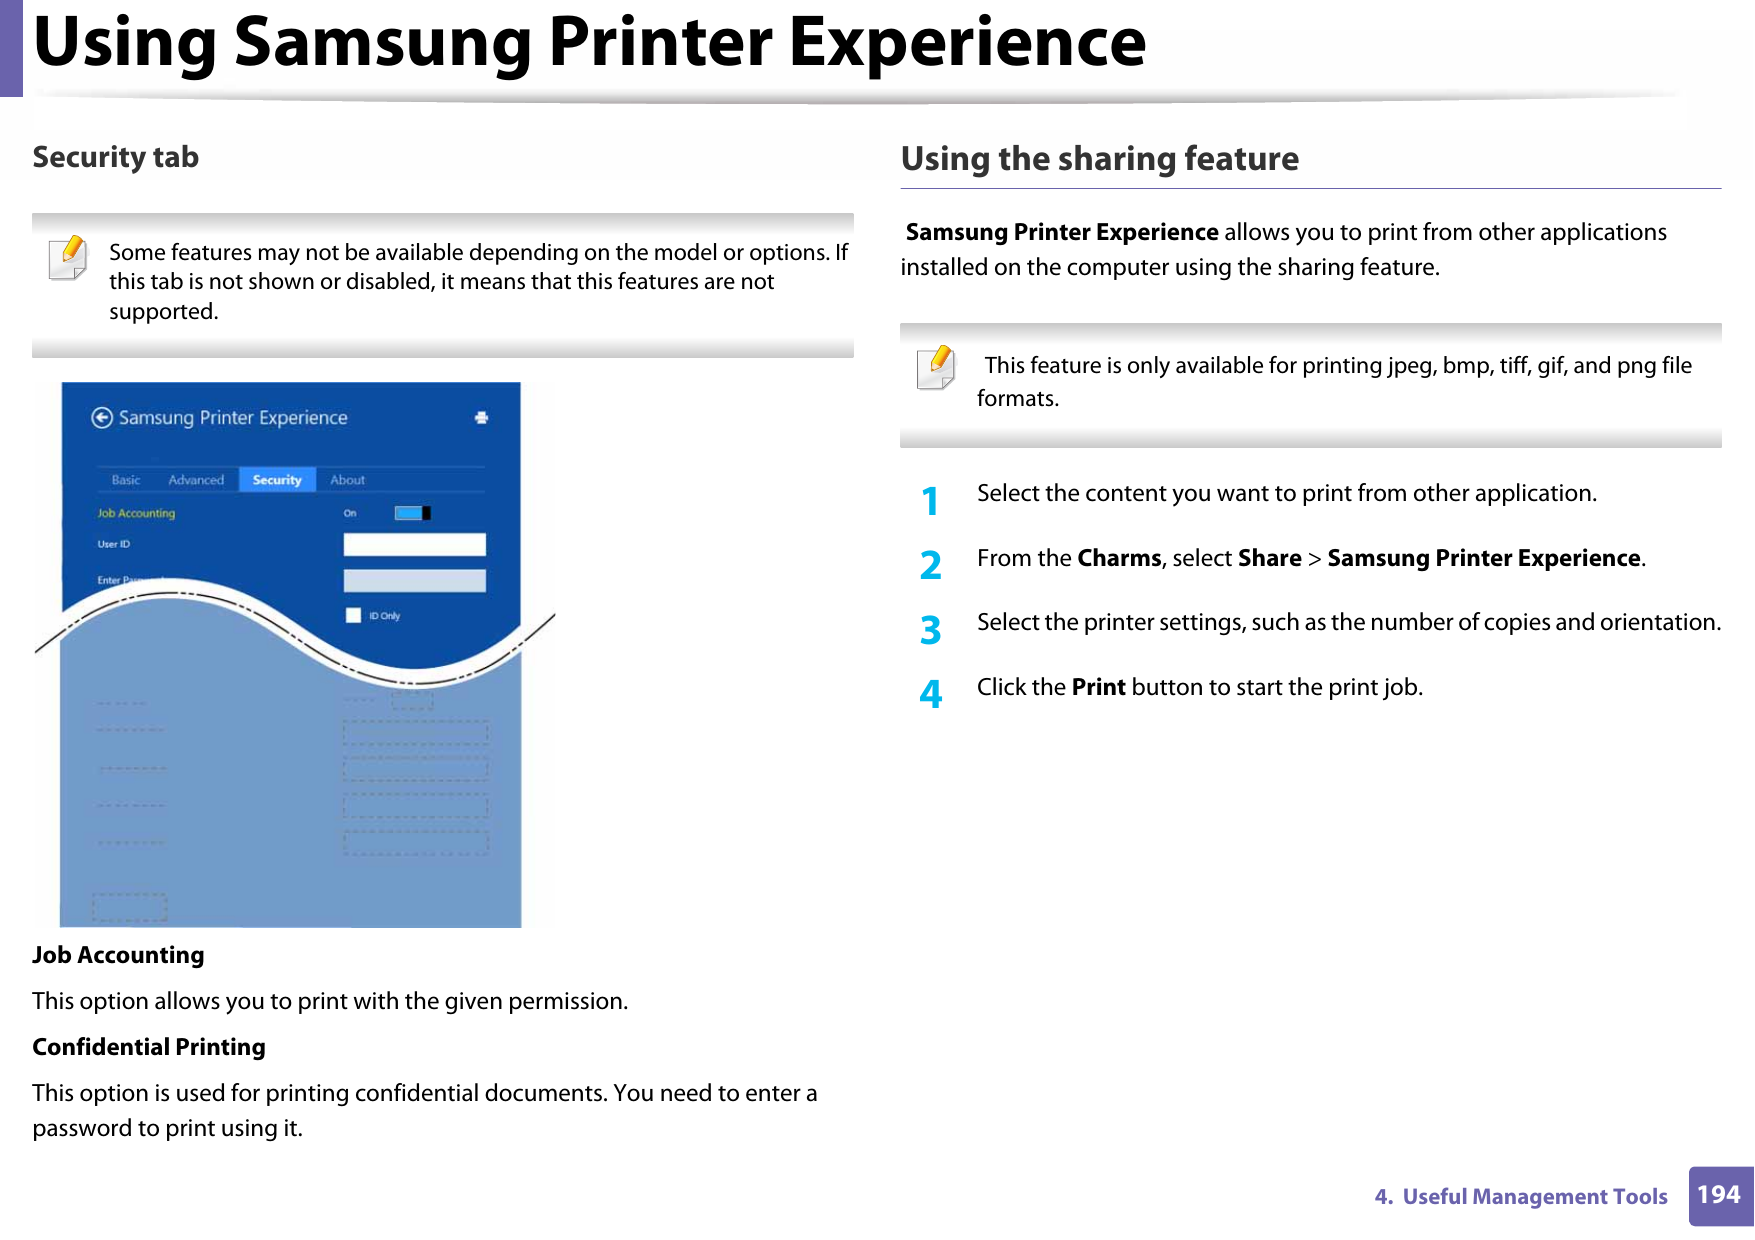 Using Samsung Printer Experience1944.  Useful Management ToolsSecurity tab Some features may not be available depending on the model or options. If this tab is not shown or disabled, it means that this features are not supported. Job AccountingThis option allows you to print with the given permission.Confidential PrintingThis option is used for printing confidential documents. You need to enter a password to print using it.Using the sharing feature Samsung Printer Experience allows you to print from other applications installed on the computer using the sharing feature.   This feature is only available for printing jpeg, bmp, tiff, gif, and png file formats. 1Select the content you want to print from other application.2  From the Charms, select Share &gt; Samsung Printer Experience.3  Select the printer settings, such as the number of copies and orientation.4  Click the Print button to start the print job.